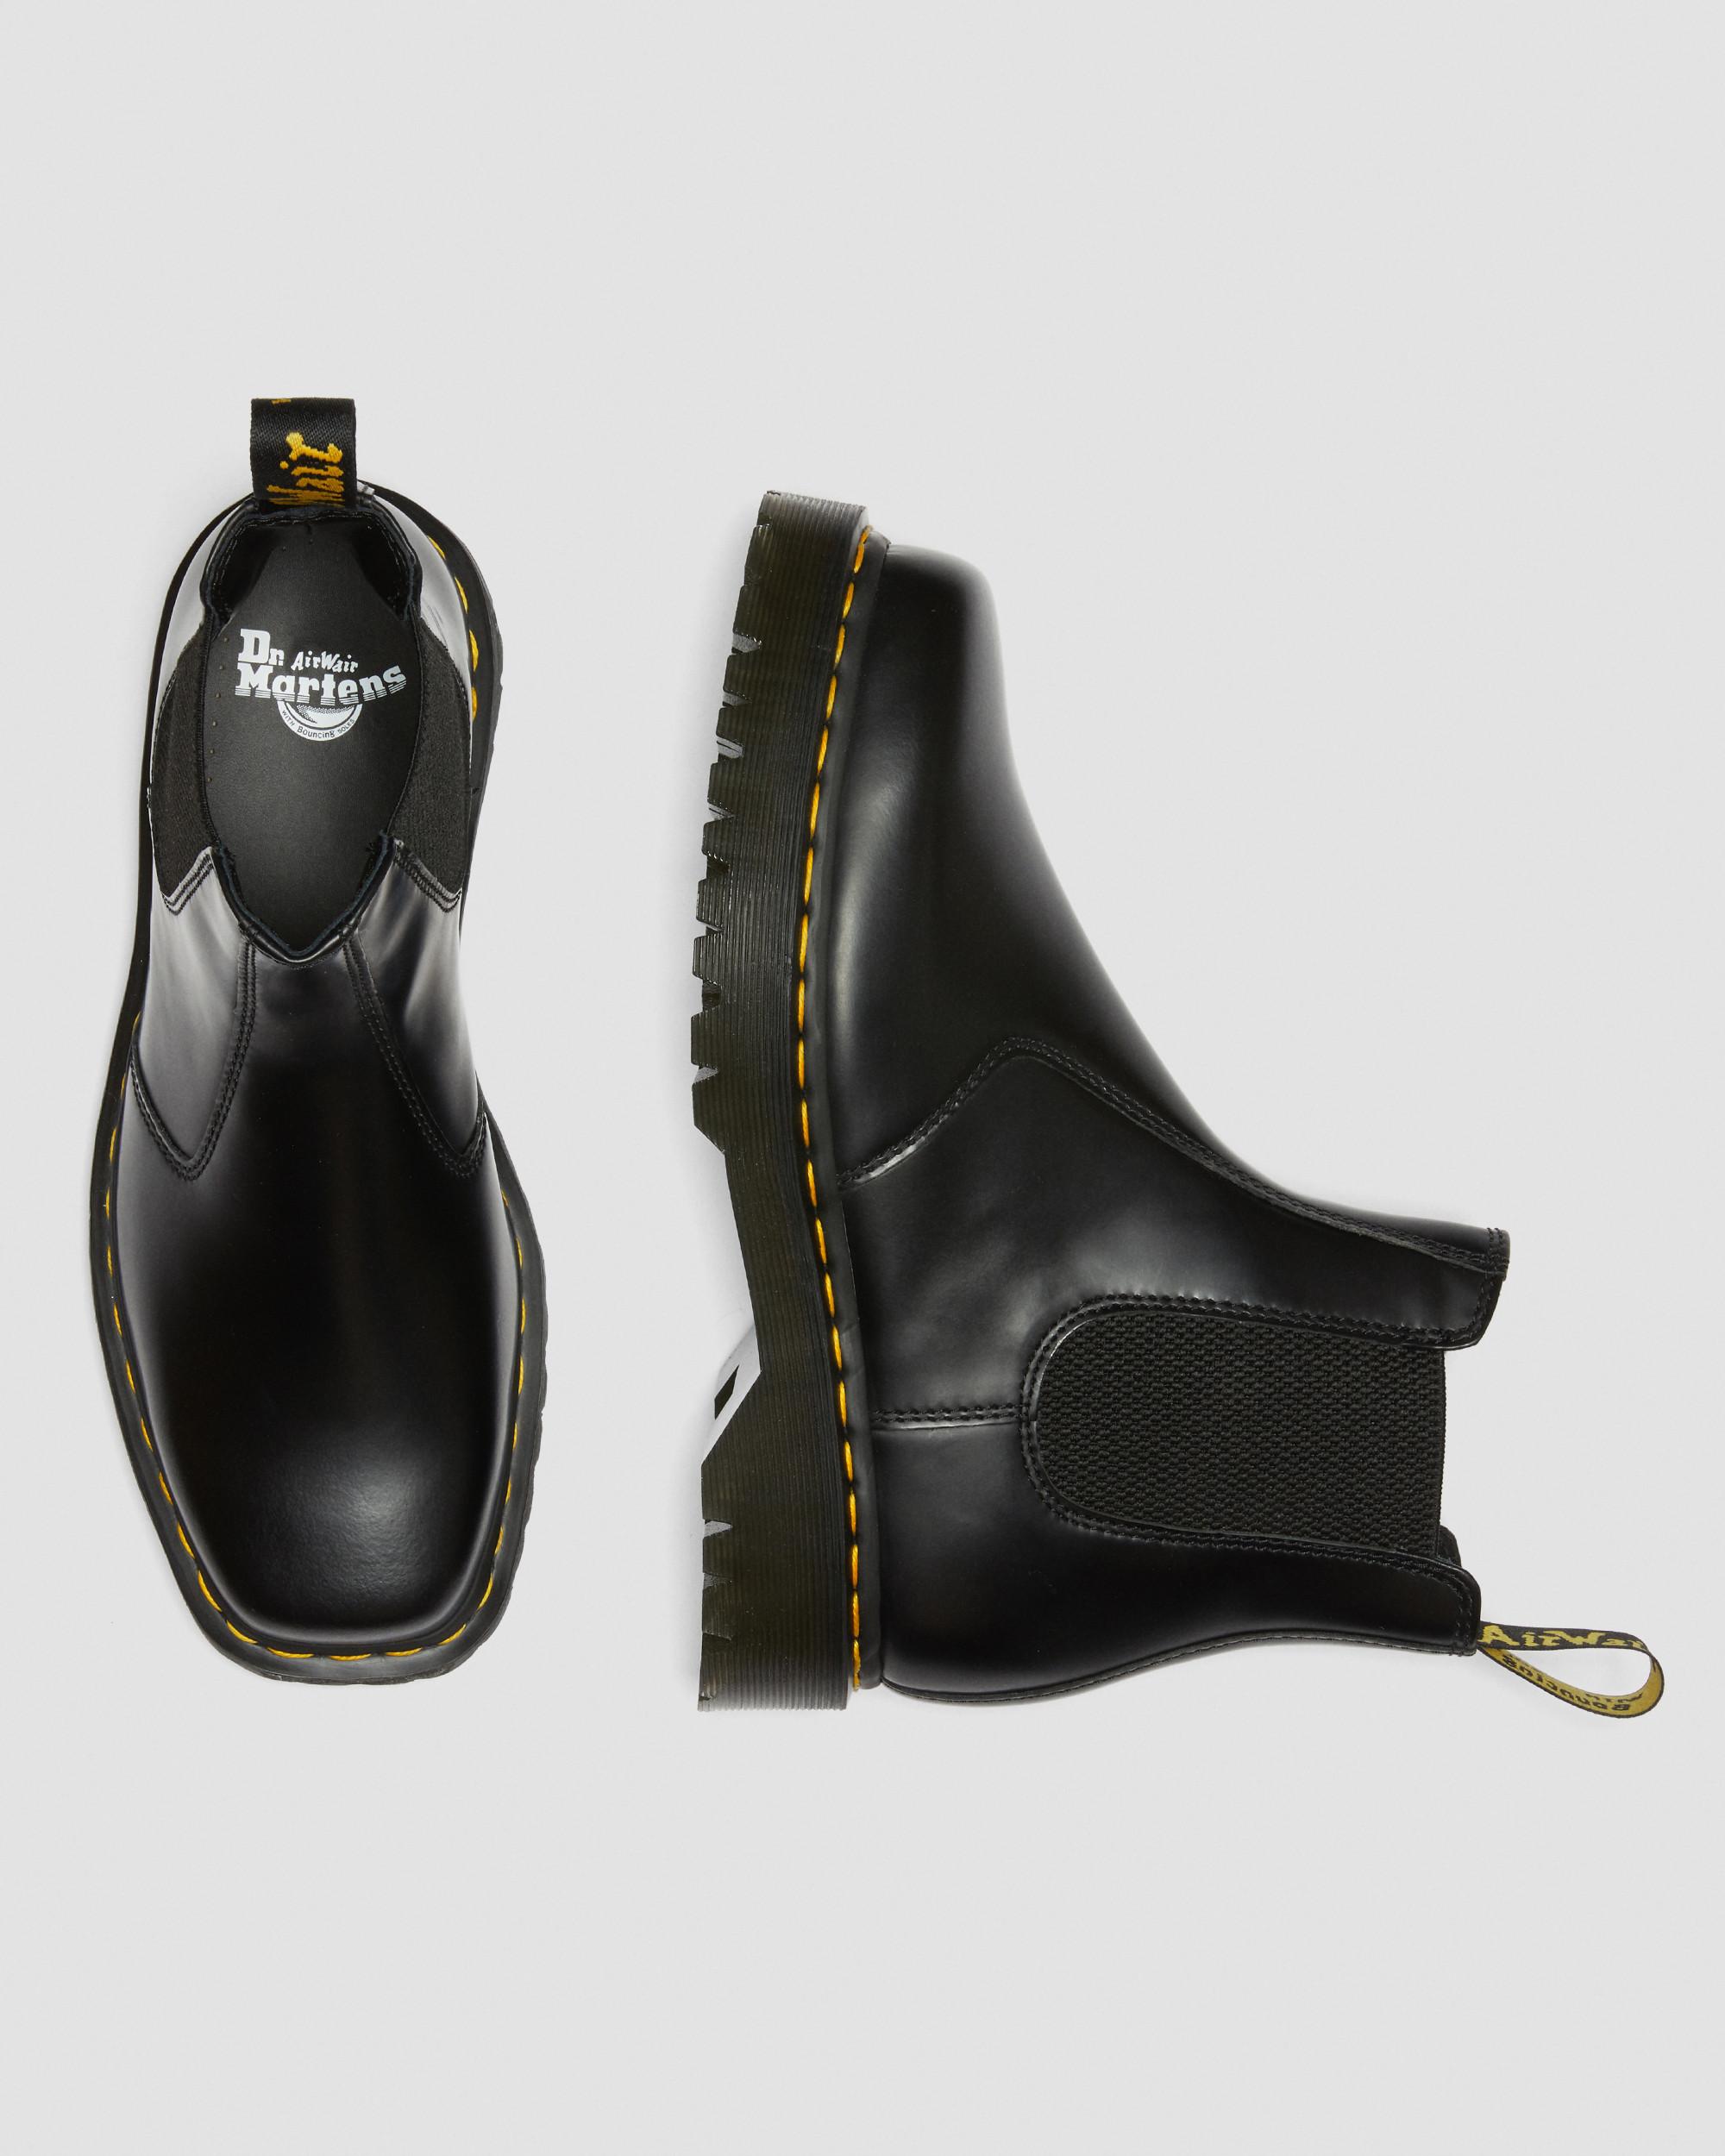 2976 Bex Squared Toe Leather Chelsea Boots2976 Bex Squared Toe Leather Chelsea Boots Dr. Martens